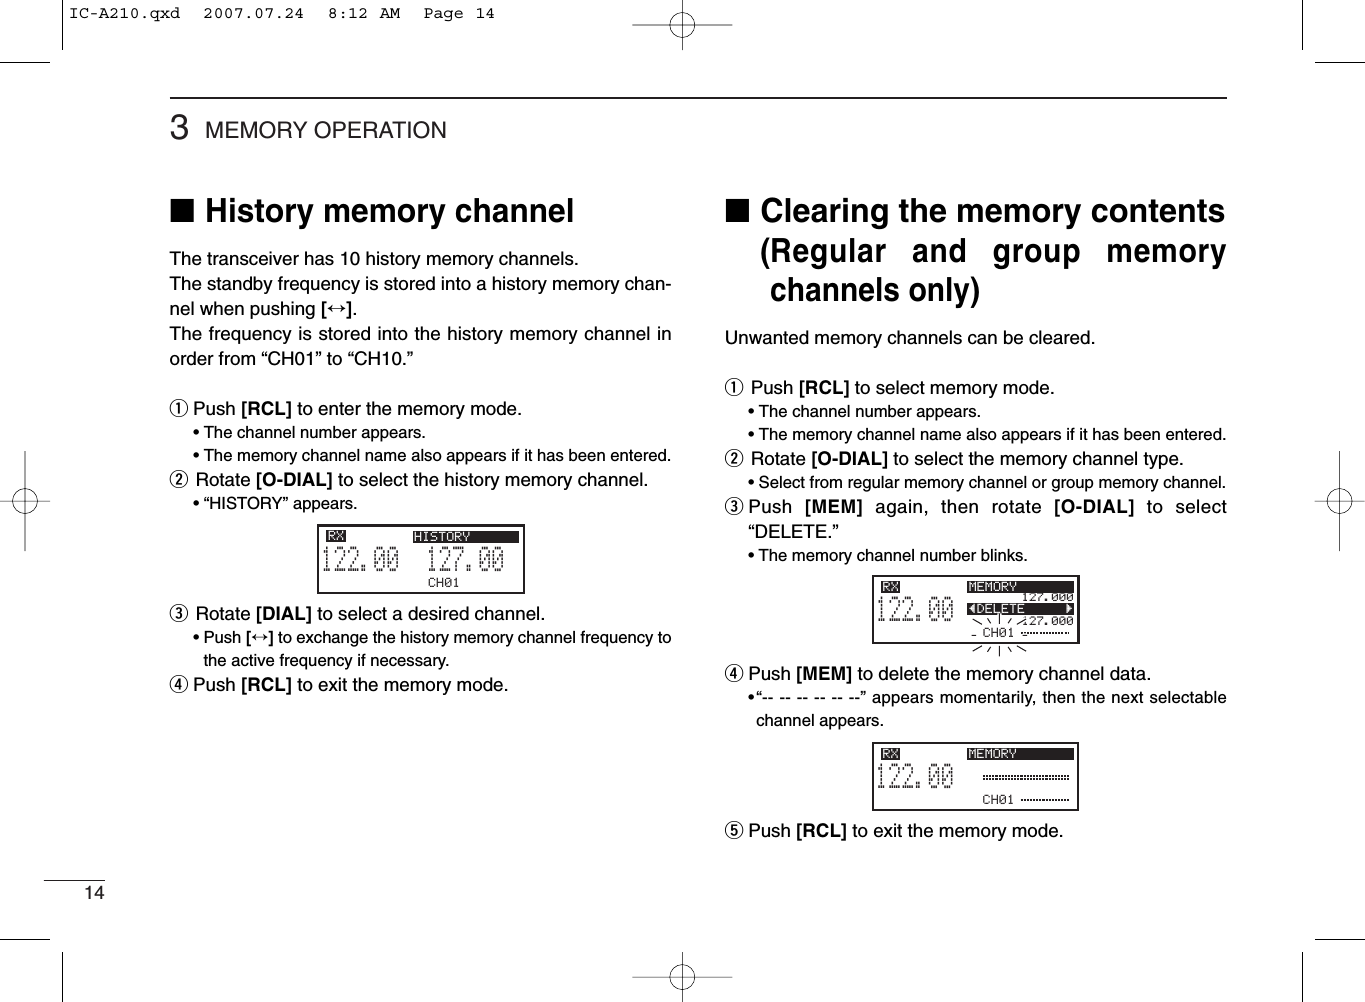 143MEMORY OPERATION■History memory channelThe transceiver has 10 history memory channels.The standby frequency is stored into a history memory chan-nel when pushing [↔].The frequency is stored into the history memory channel inorder from “CH01” to “CH10.”qPush [RCL] to enter the memory mode.• The channel number appears.• The memory channel name also appears if it has been entered.wRotate [O-DIAL] to select the history memory channel.• “HISTORY” appears.eRotate [DIAL] to select a desired channel.• Push [↔]to exchange the history memory channel frequency tothe active frequency if necessary.rPush [RCL] to exit the memory mode.■Clearing the memory contents(Regular and group memorychannels only)Unwanted memory channels can be cleared.qPush [RCL] to select memory mode.• The channel number appears.• The memory channel name also appears if it has been entered.wRotate [O-DIAL] to select the memory channel type.• Select from regular memory channel or group memory channel.ePush  [MEM] again, then rotate [O-DIAL] to select“DELETE.”• The memory channel number blinks.rPush [MEM] to delete the memory channel data.•“-- -- -- -- -- --” appears momentarily, then the next selectablechannel appears.tPush [RCL] to exit the memory mode.CH01127.005122.00RX HISTORYCH01127.000127.000122.00RX MEMORYÅDELETE       ÇCH01122.00RX MEMORYIC-A210.qxd  2007.07.24  8:12 AM  Page 14